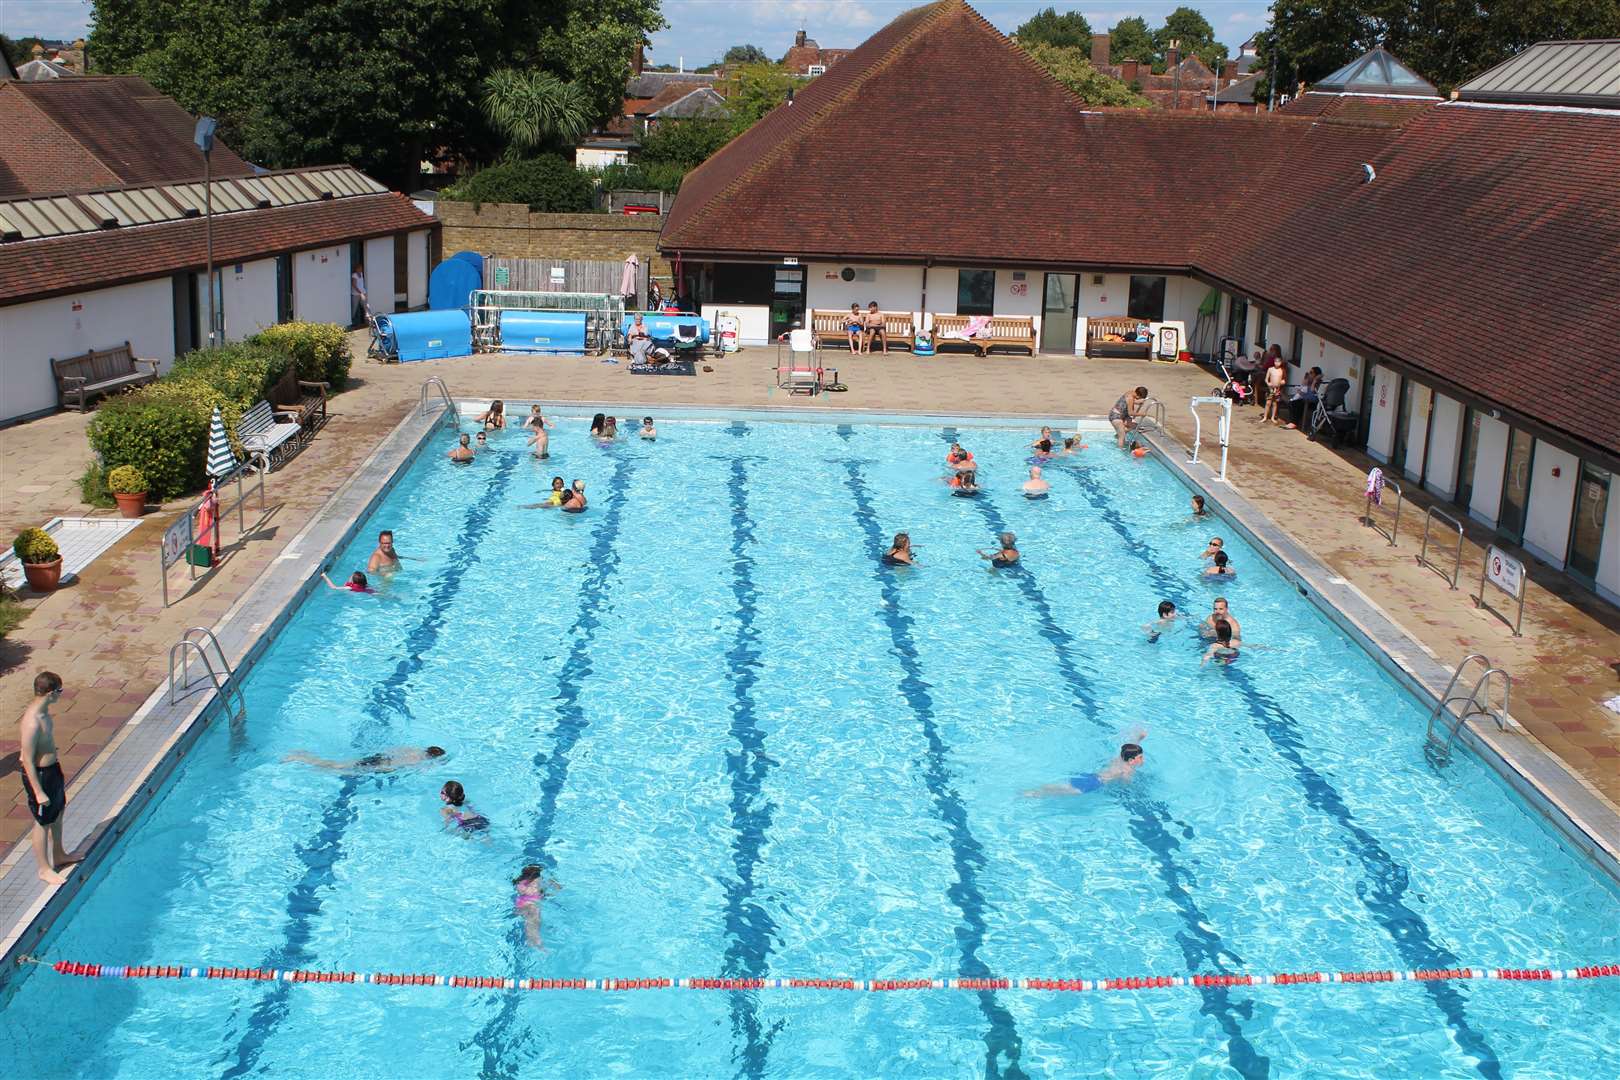 The swimming centre will be closed until Tuesday, November 14. Picture: Poppy Boorman/Faversham Pools